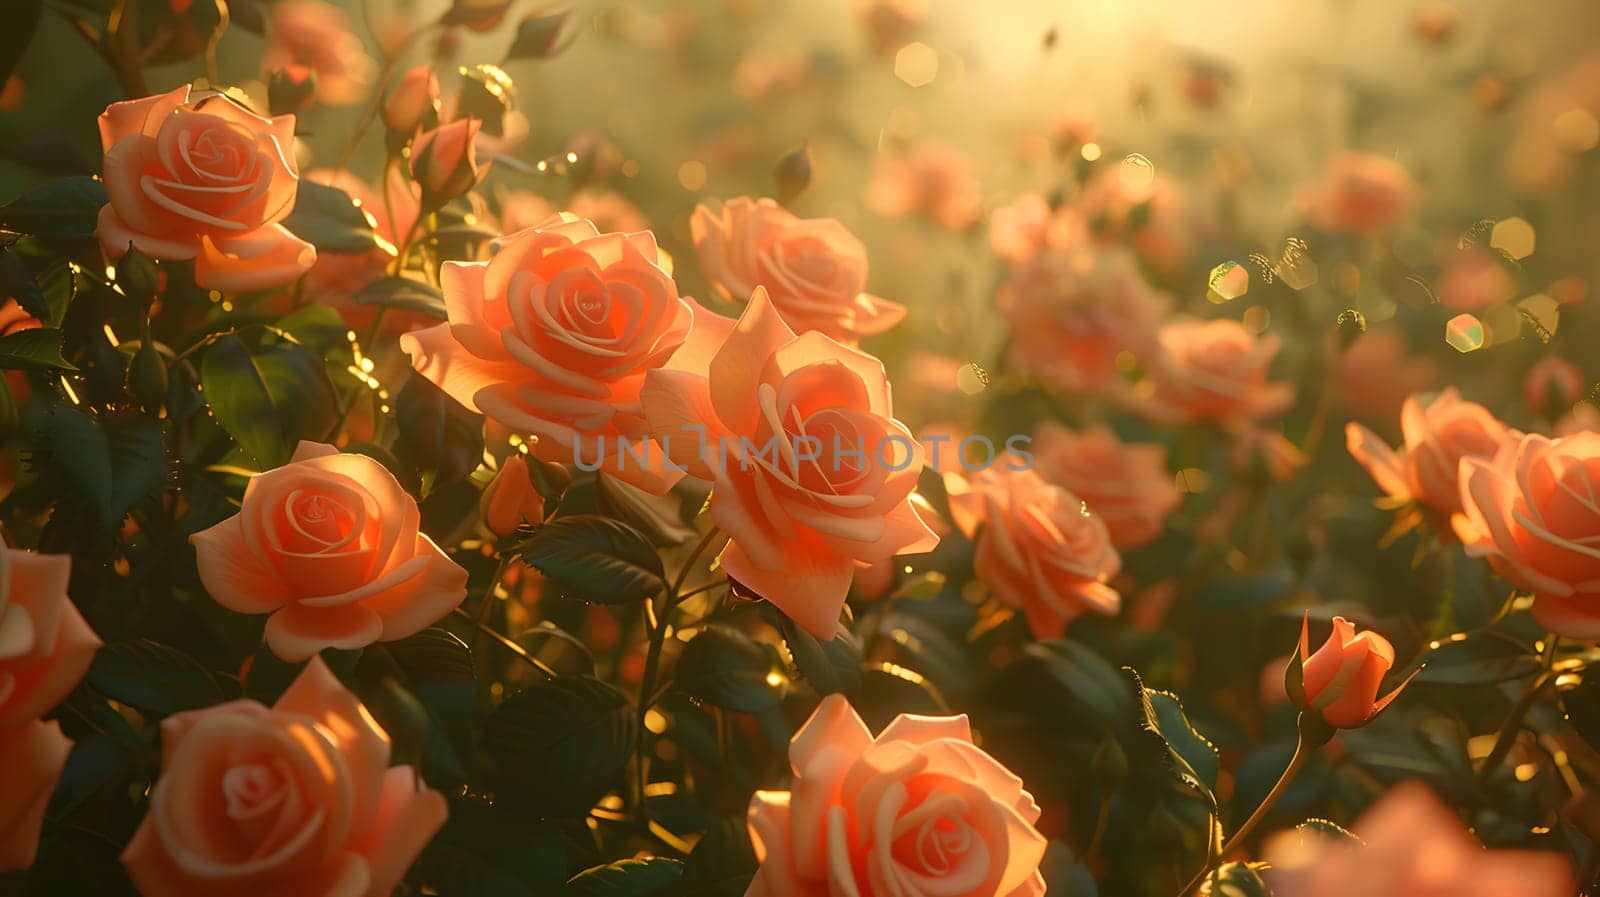 Hybrid tea roses in a field, petals glowing orange in the sun by Nadtochiy